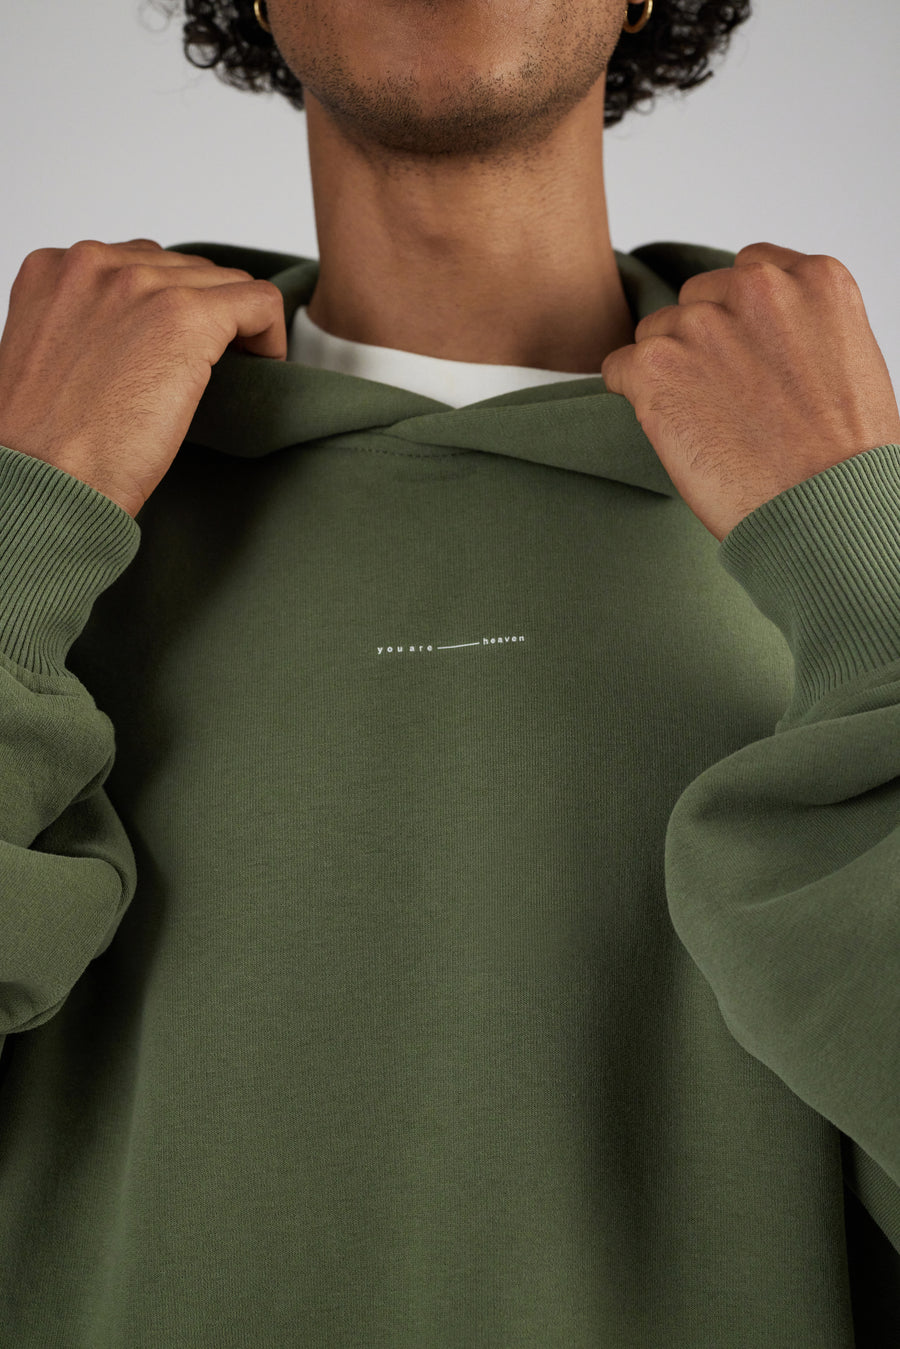 Men wearing a hoodie in color sage green with printed wording detail at front upper chest